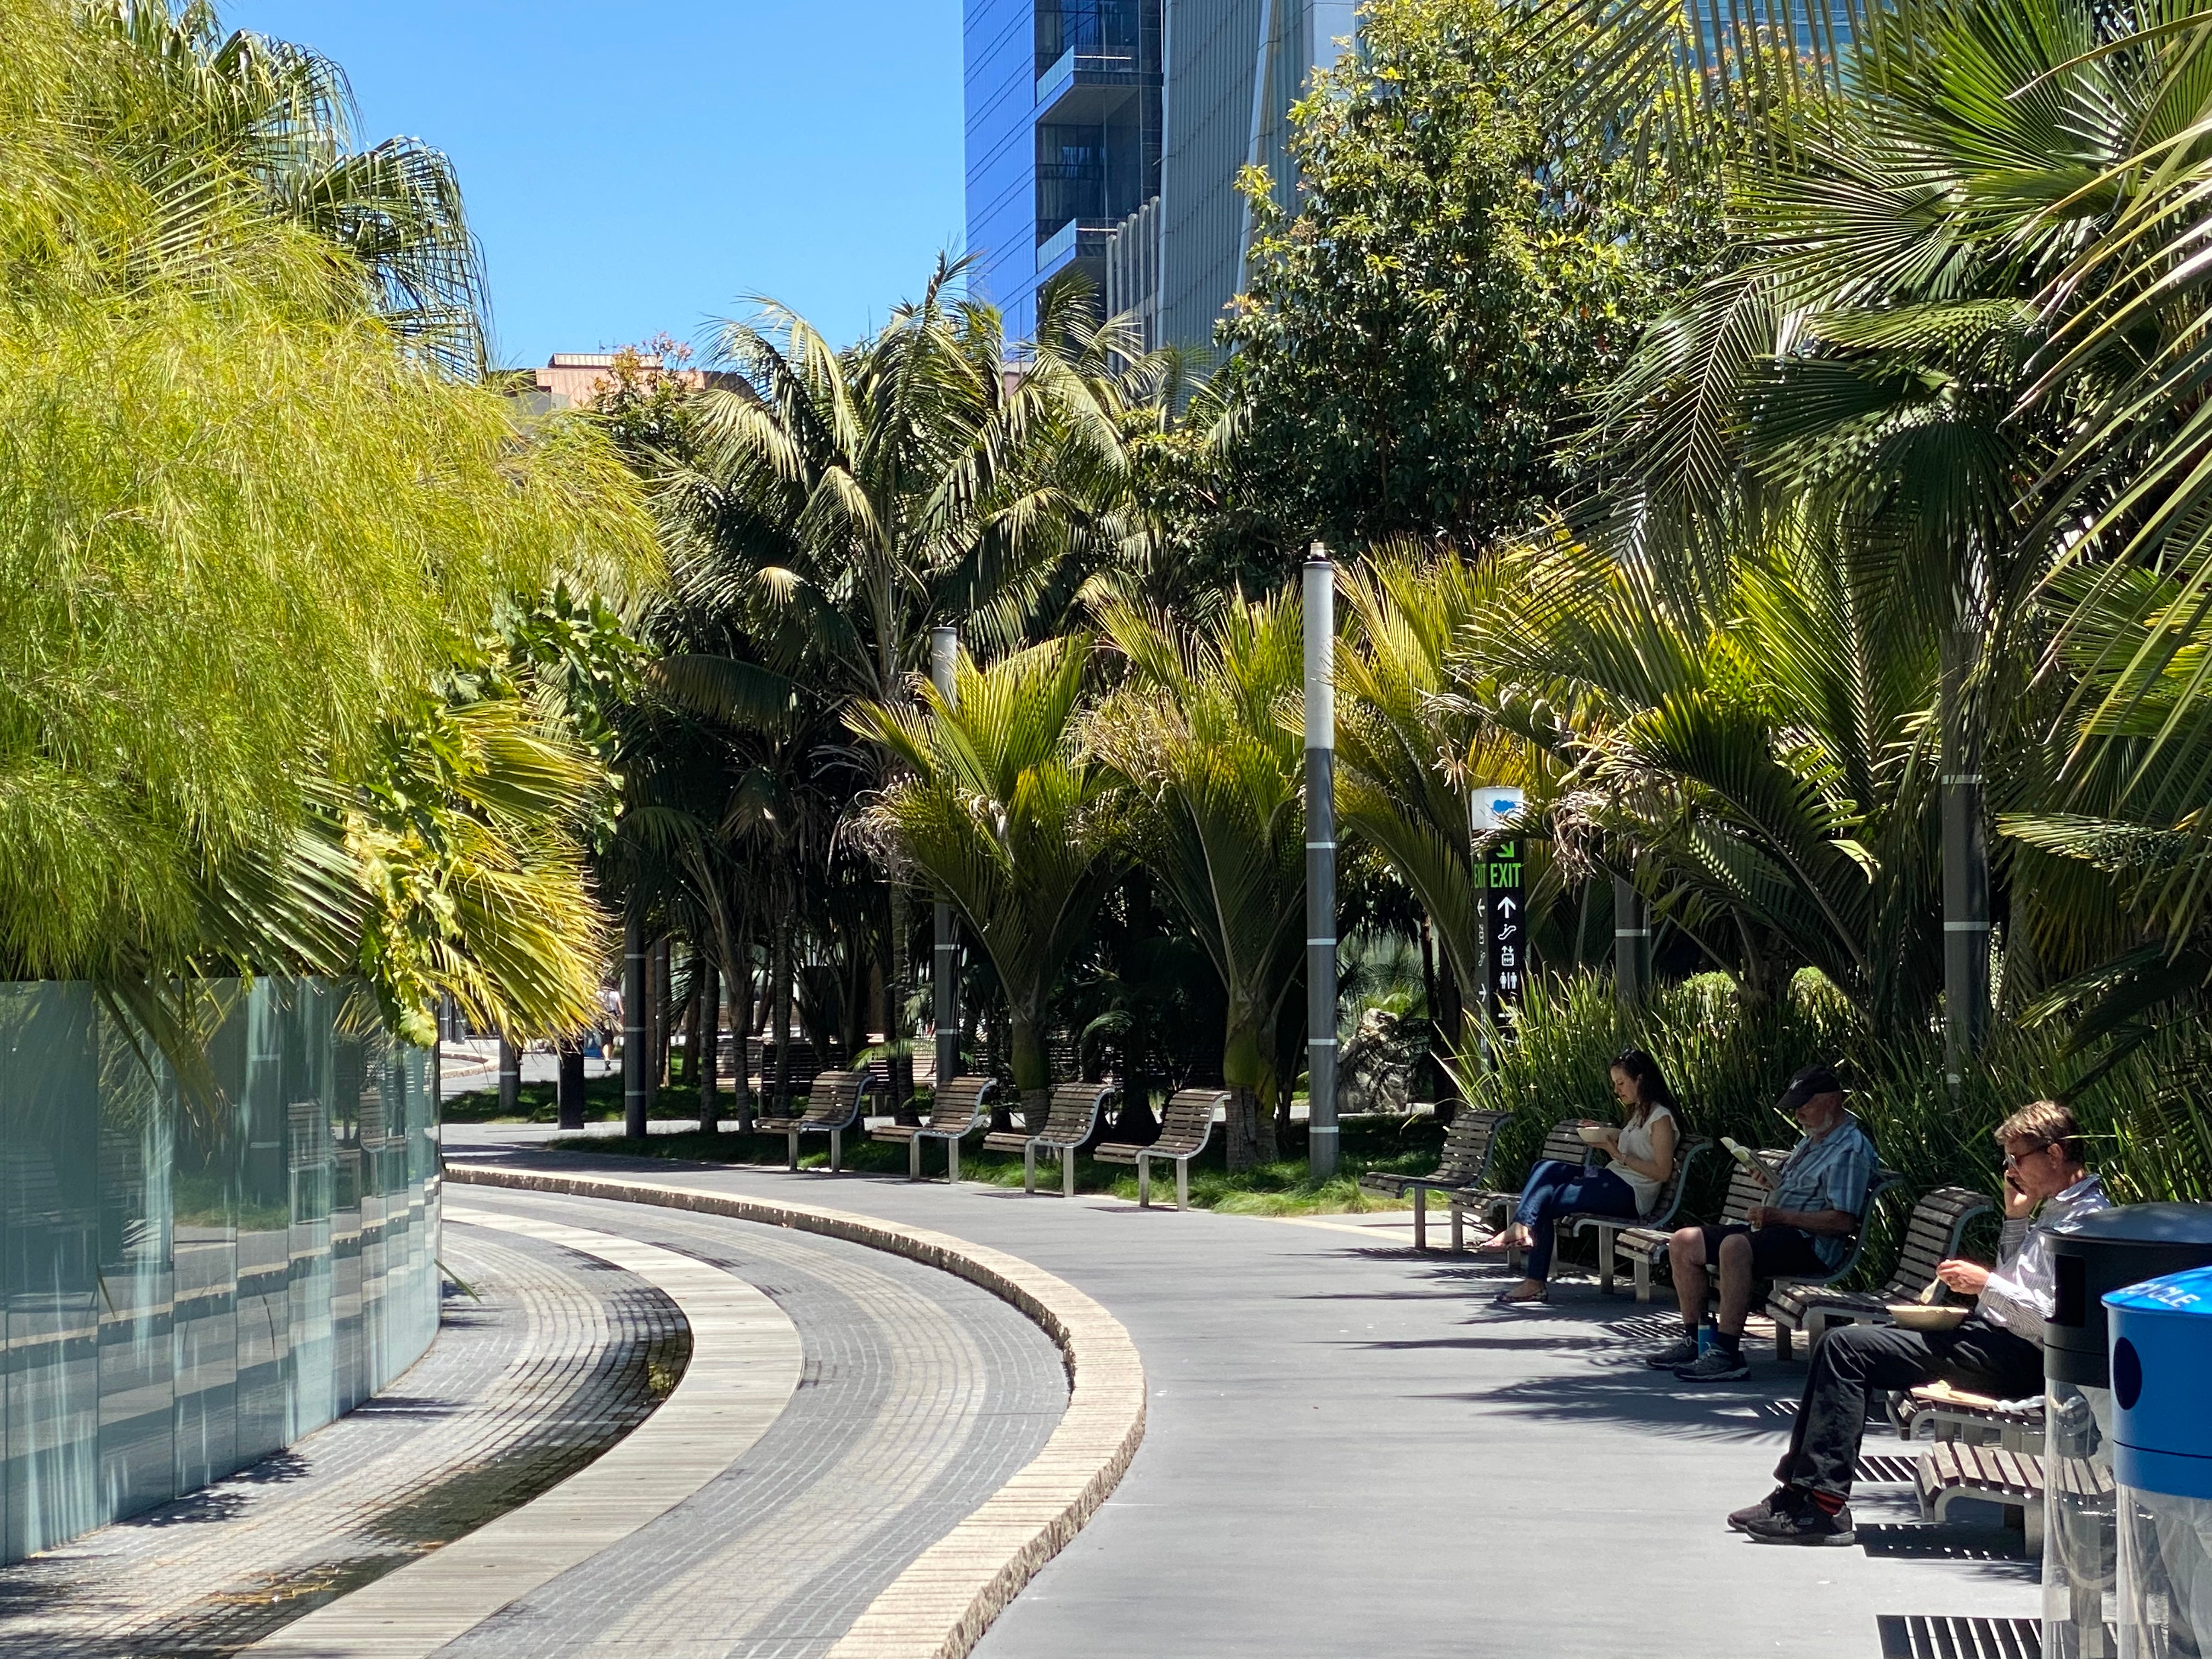 Office workers enjoy a sunny lunch amid tropical plants at Salesforce Park, an elevated green space in San Francisco.